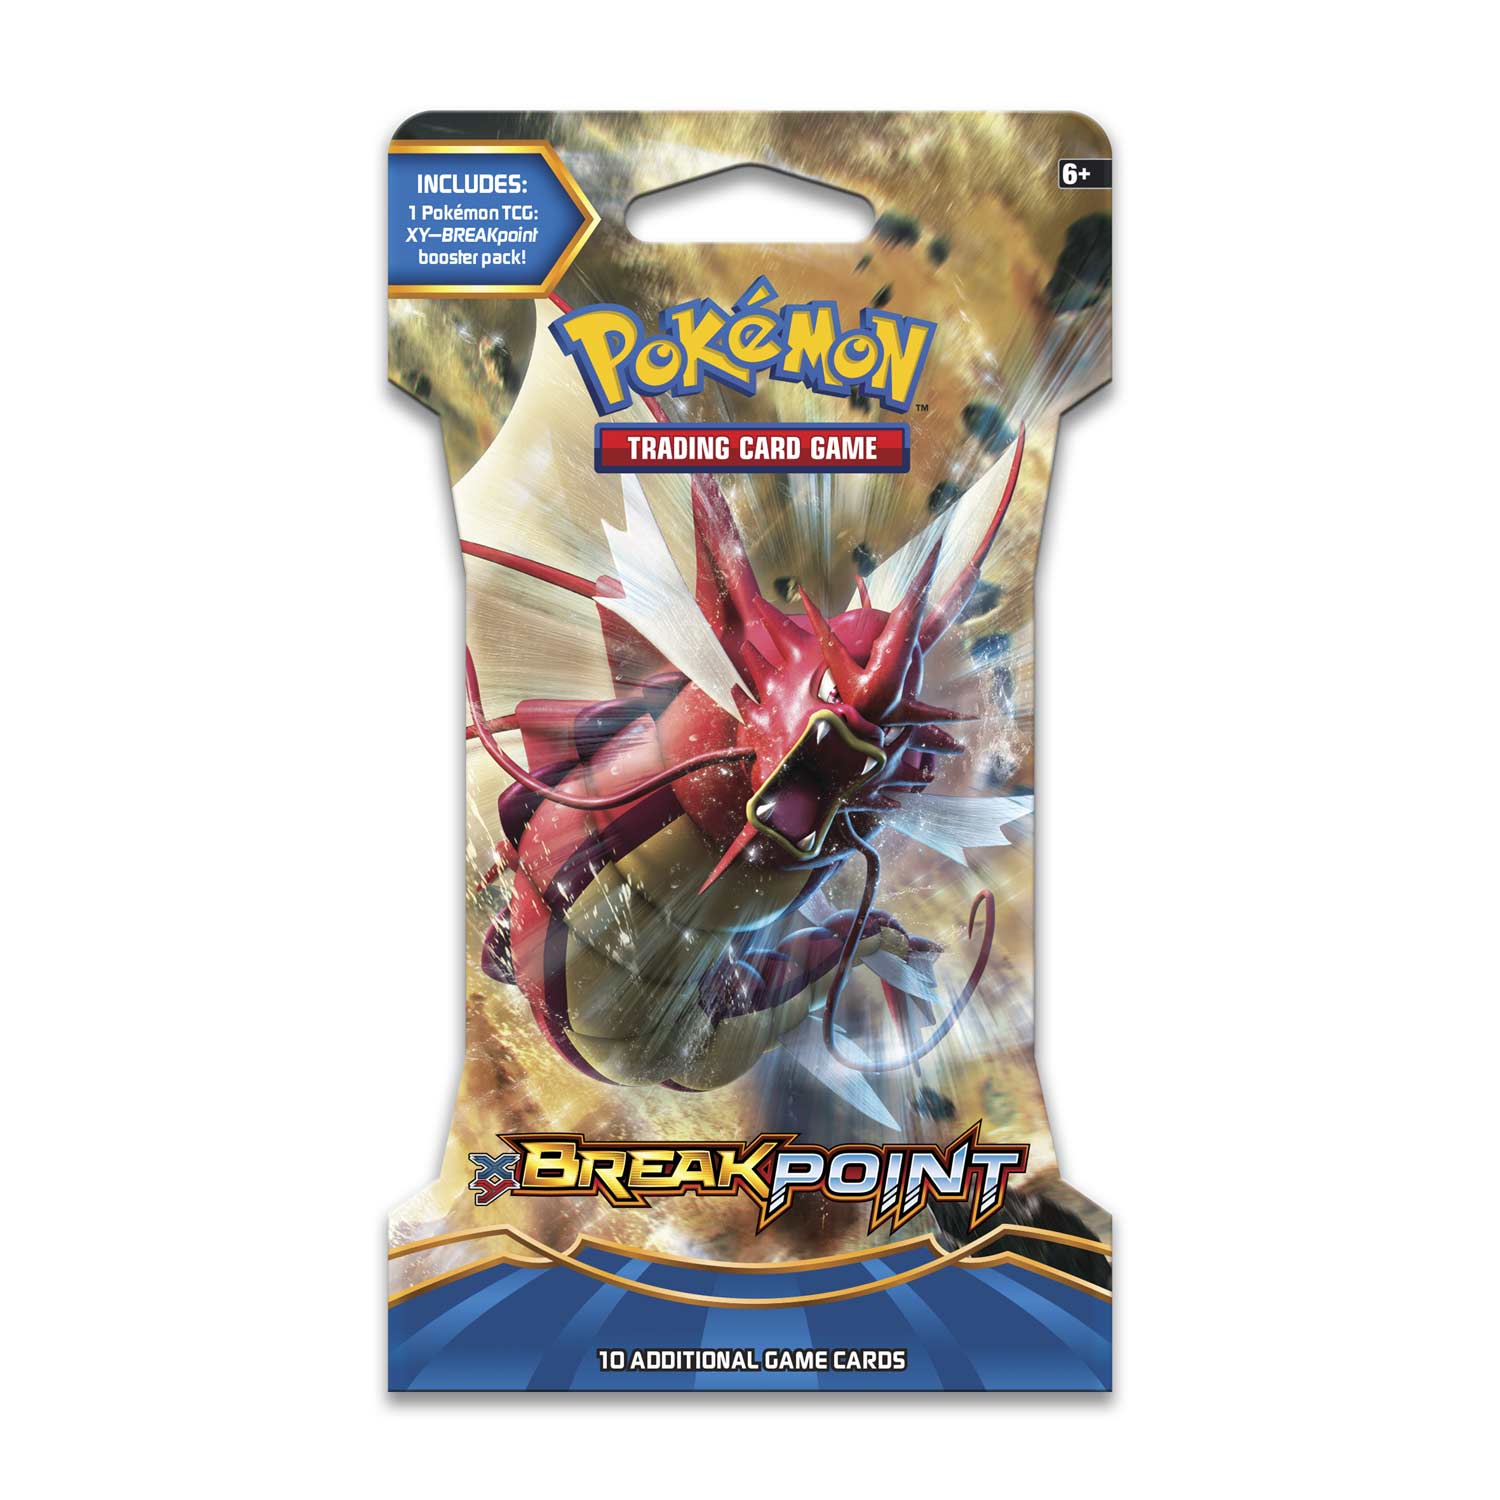 Pokemon TCG XY Breakpoint Sleeved Booster Pack 